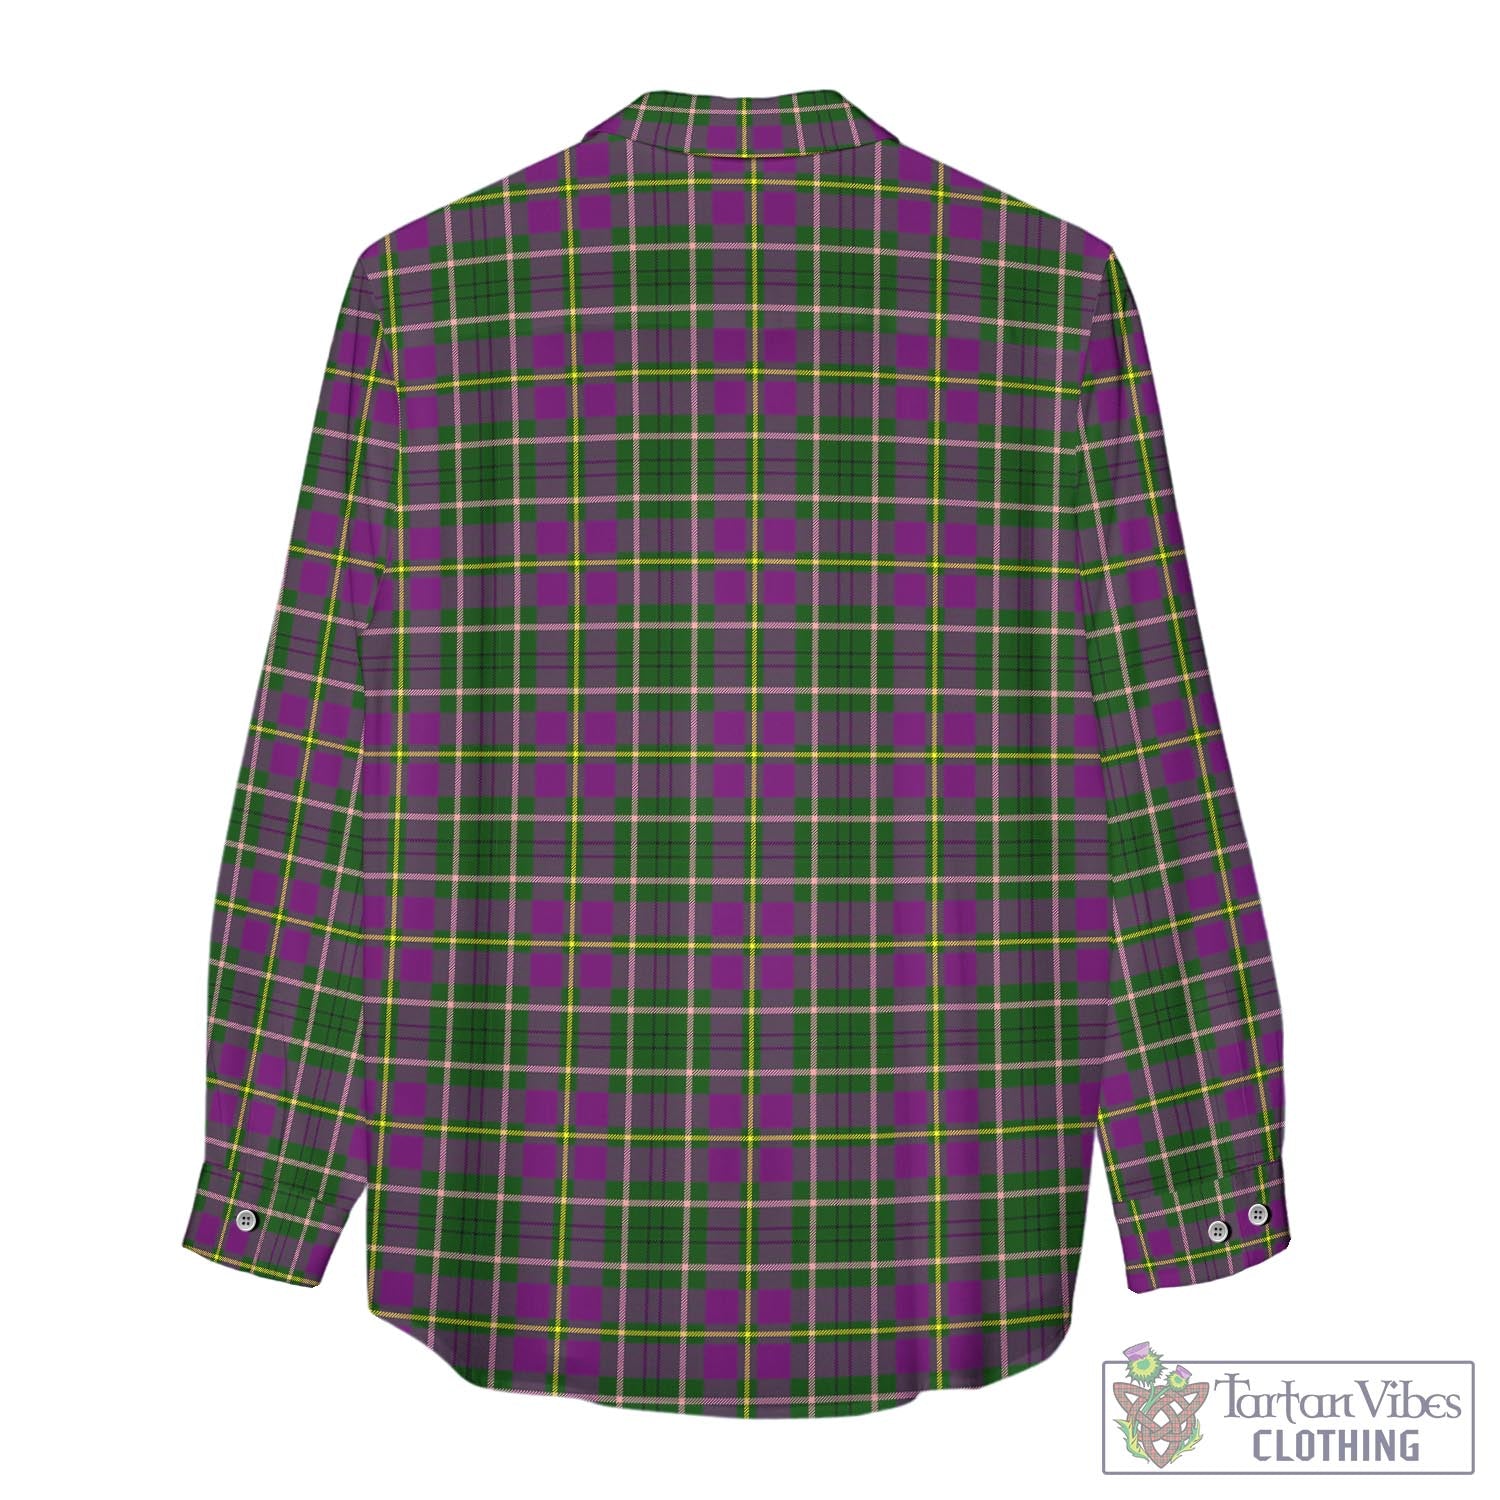 Tartan Vibes Clothing Taylor Tartan Womens Casual Shirt with Family Crest